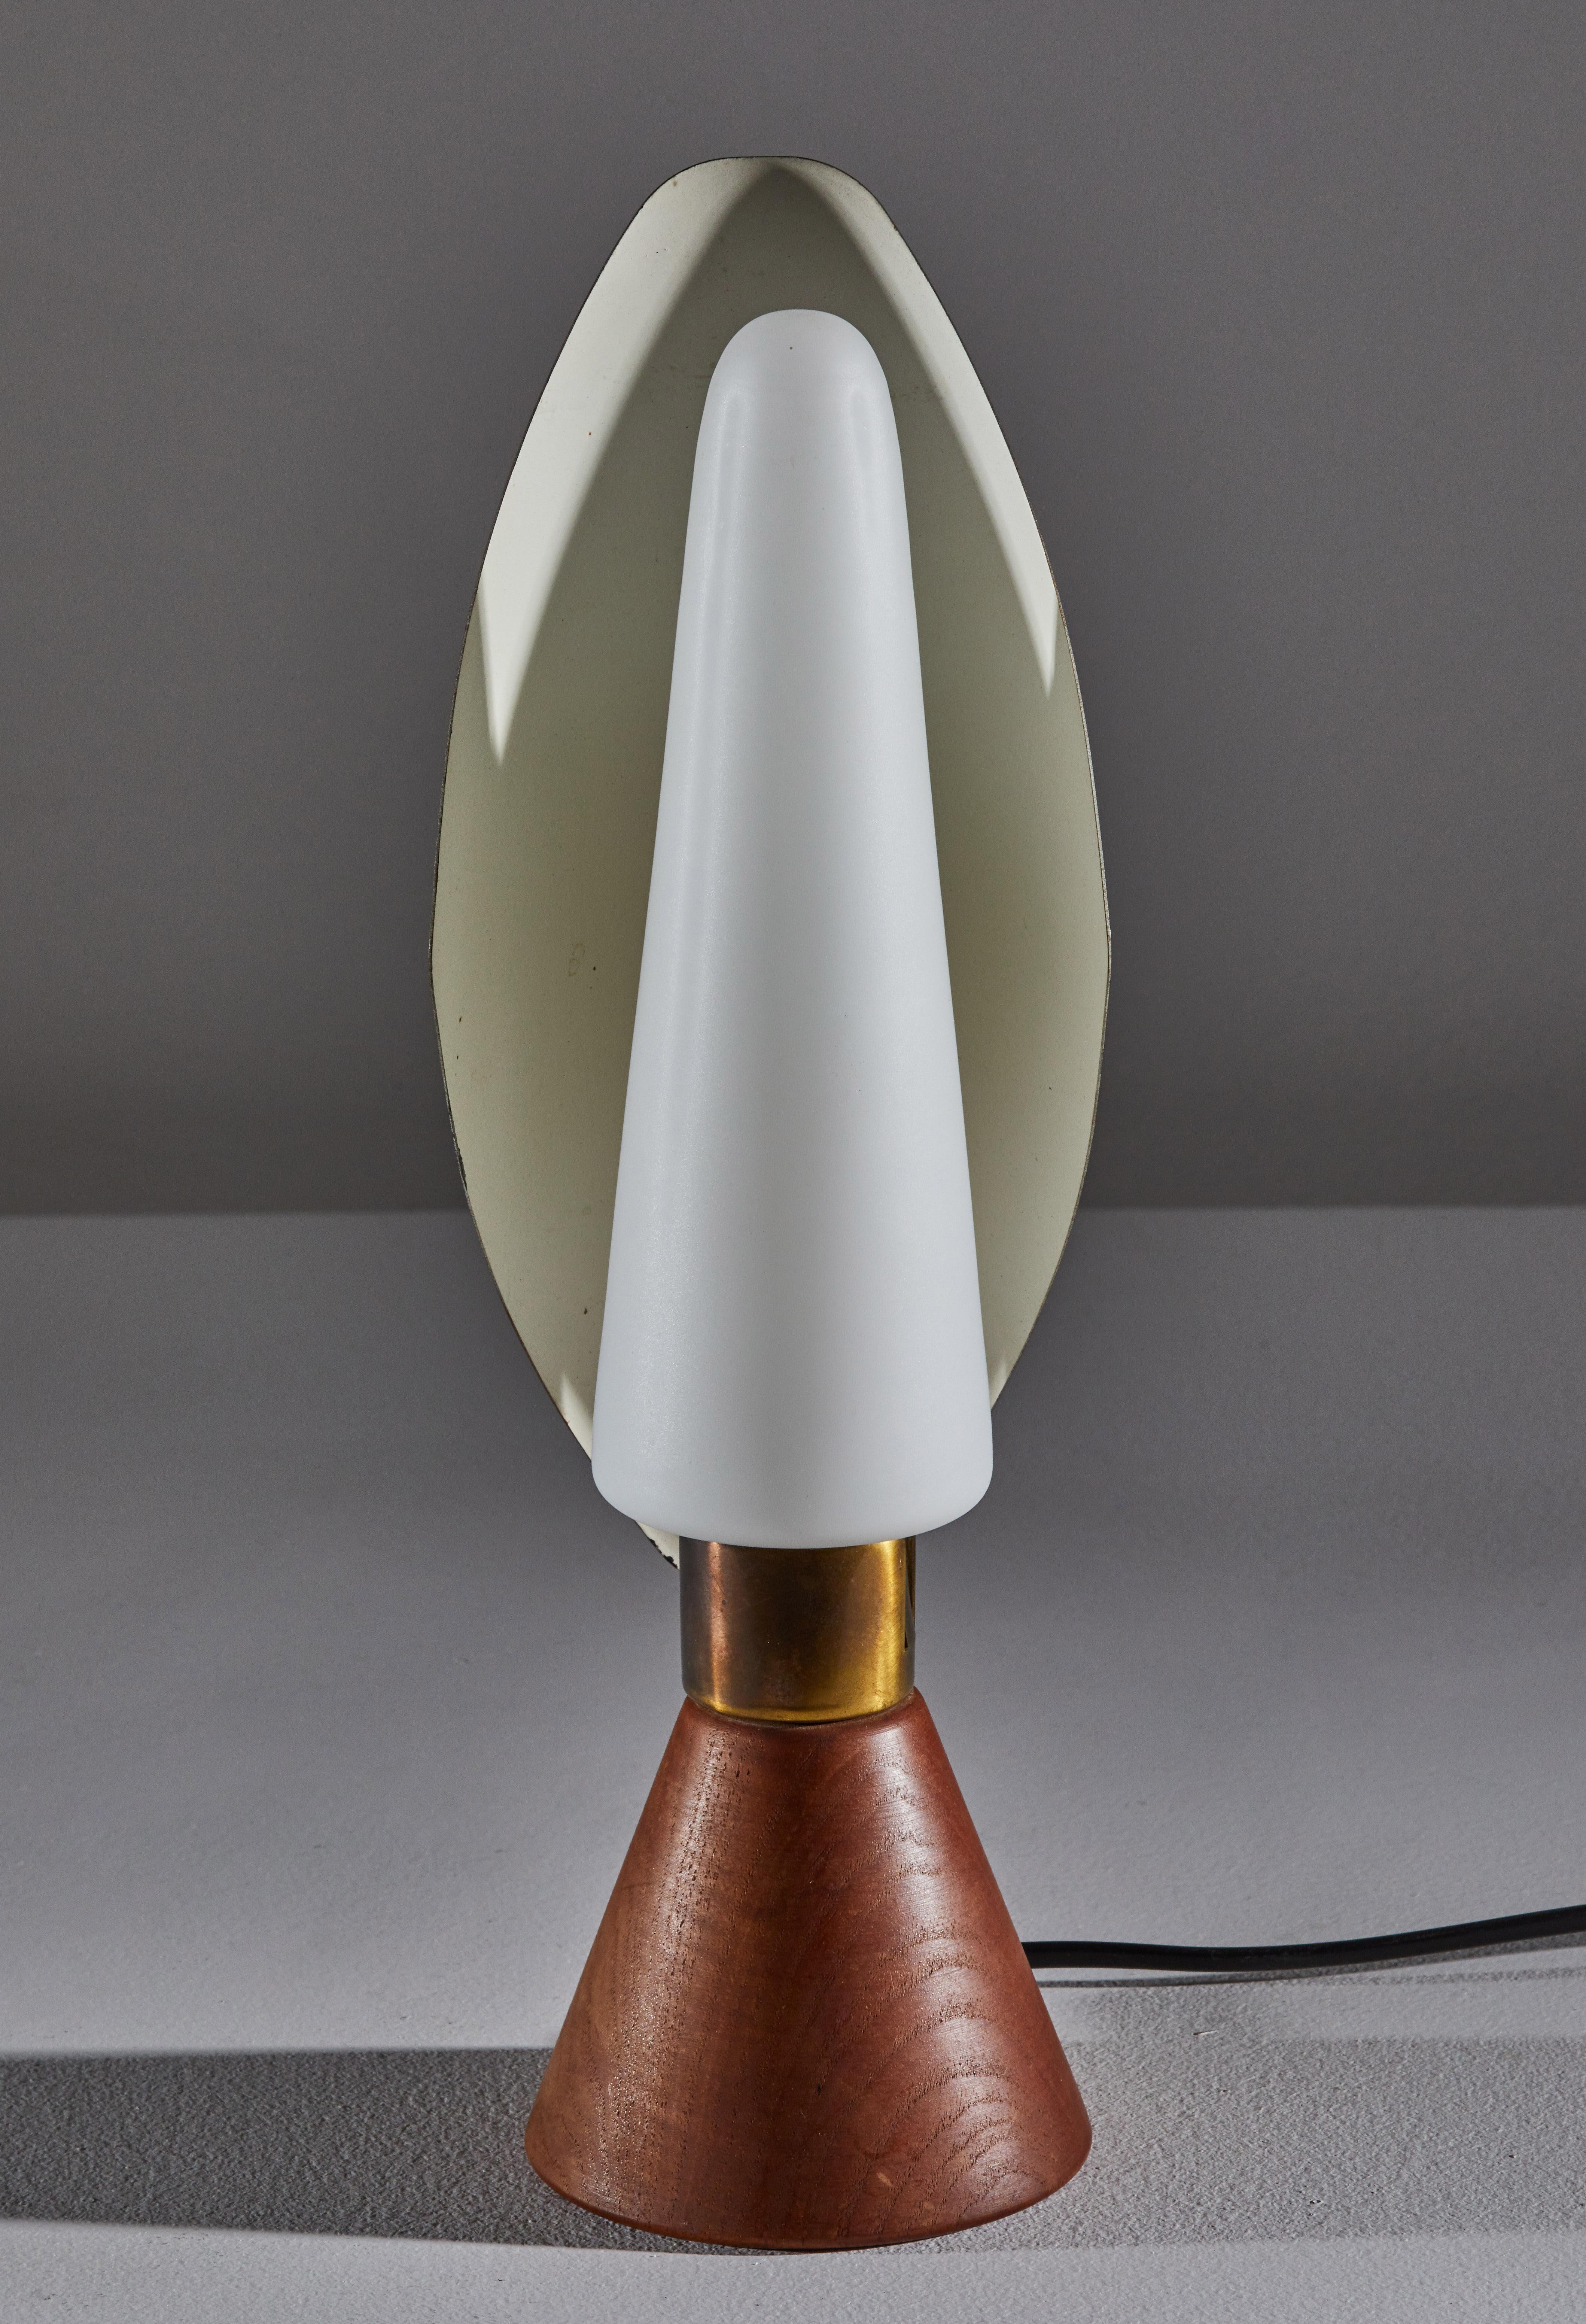 Rare Table Lamp by Svend Aage Holm Sørensen for ASEA 1